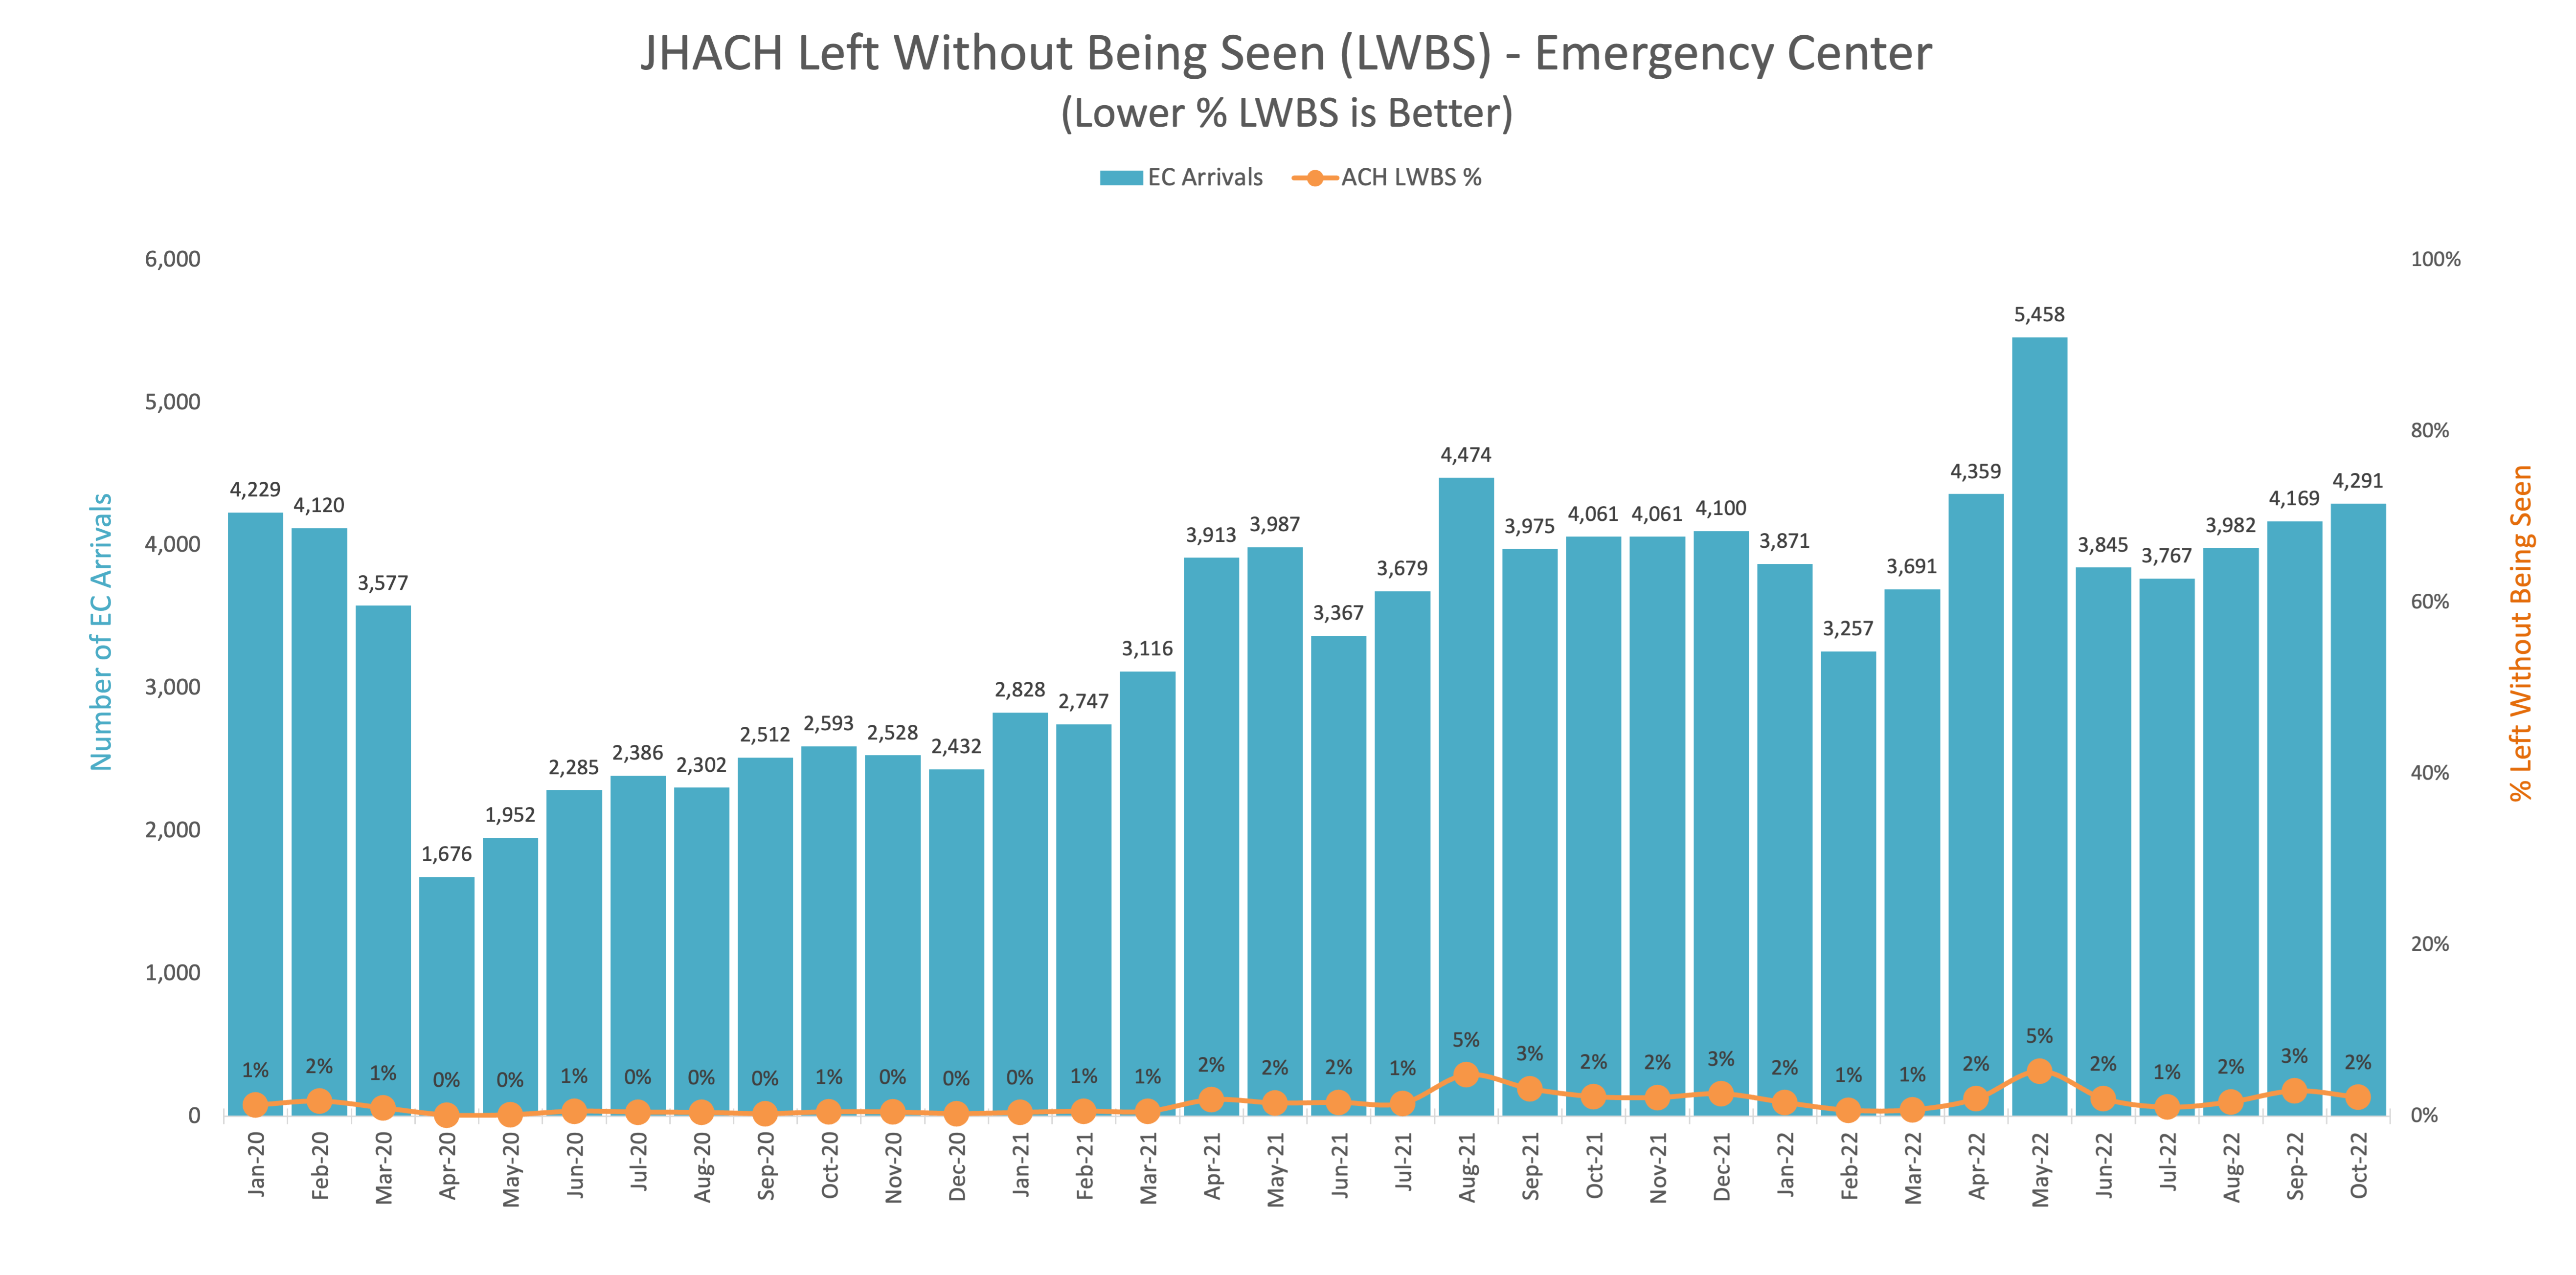 Left Without Being Seen is a performance measure of the percent of patients who left the Emergency Center before a medical screening has been initiated.